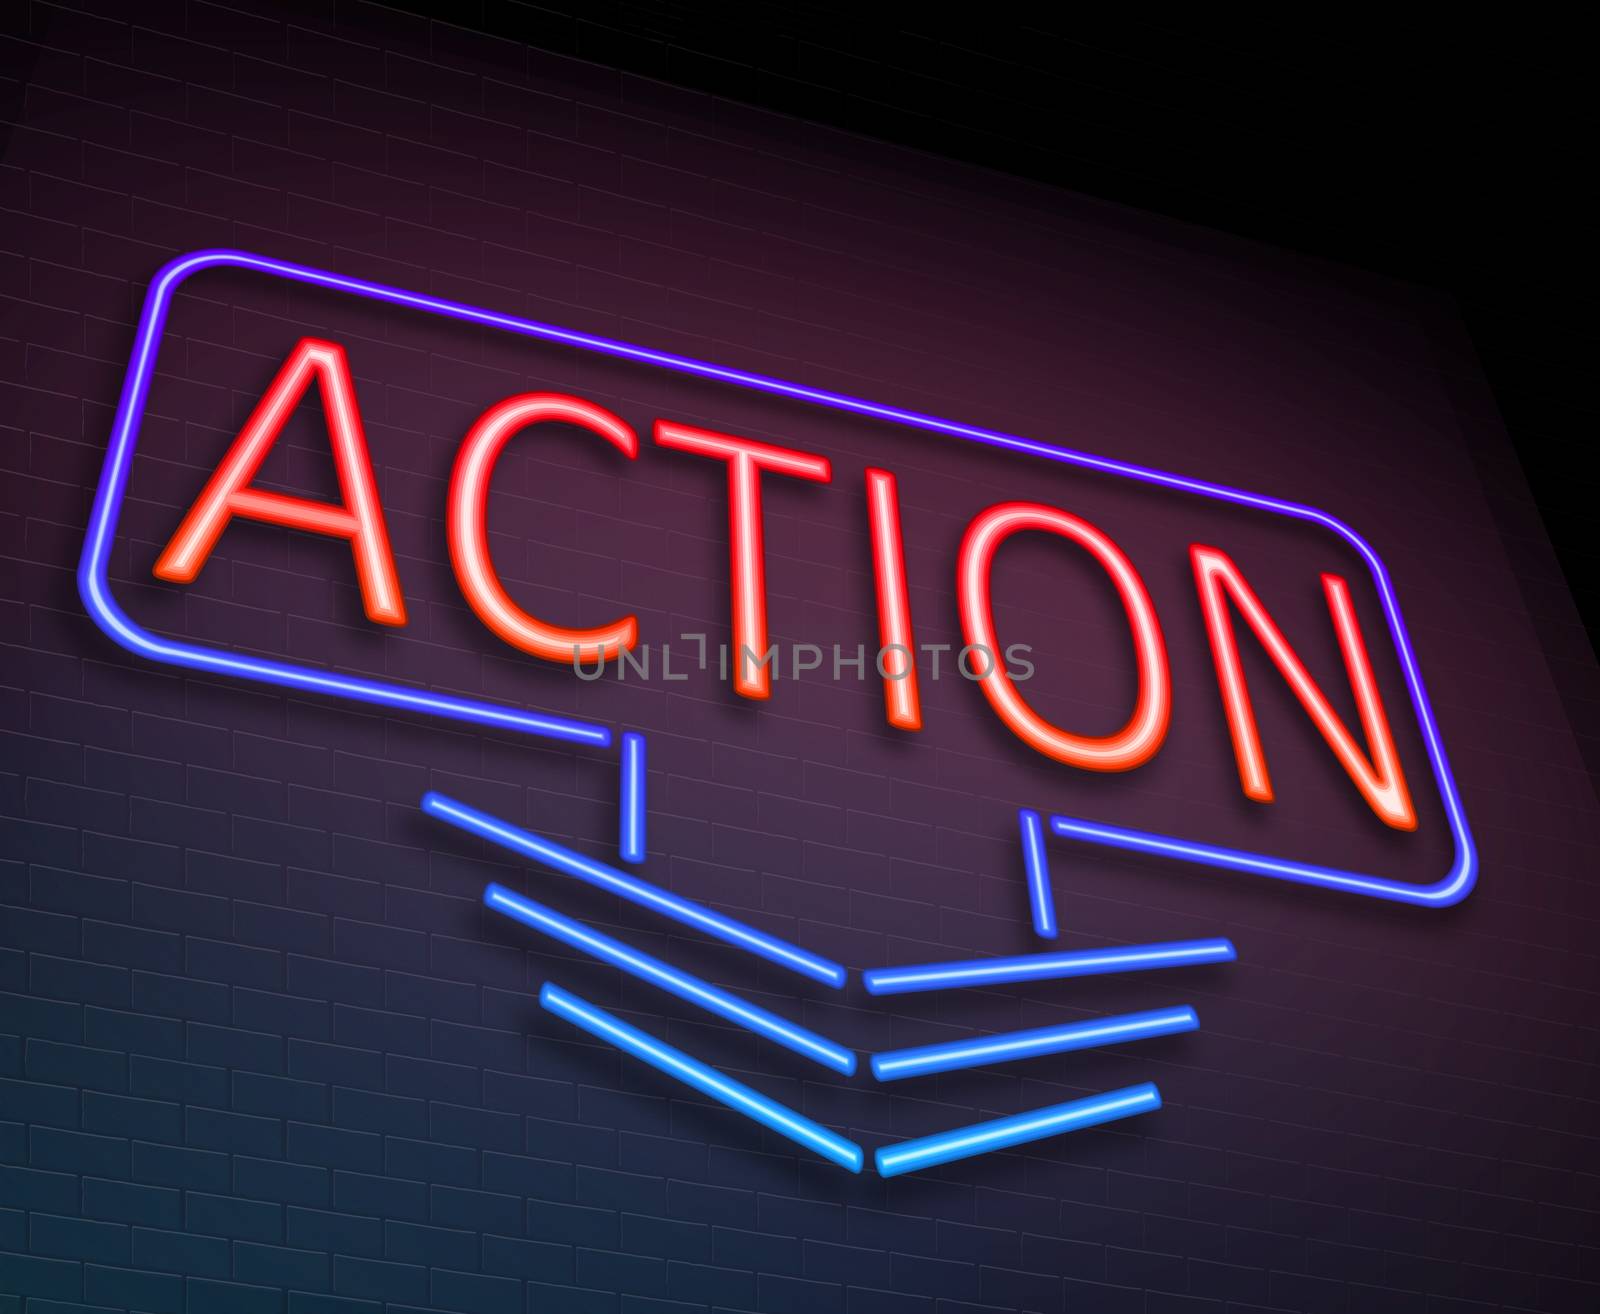 Illustration depicting an illuminated neon sign with an action concept.